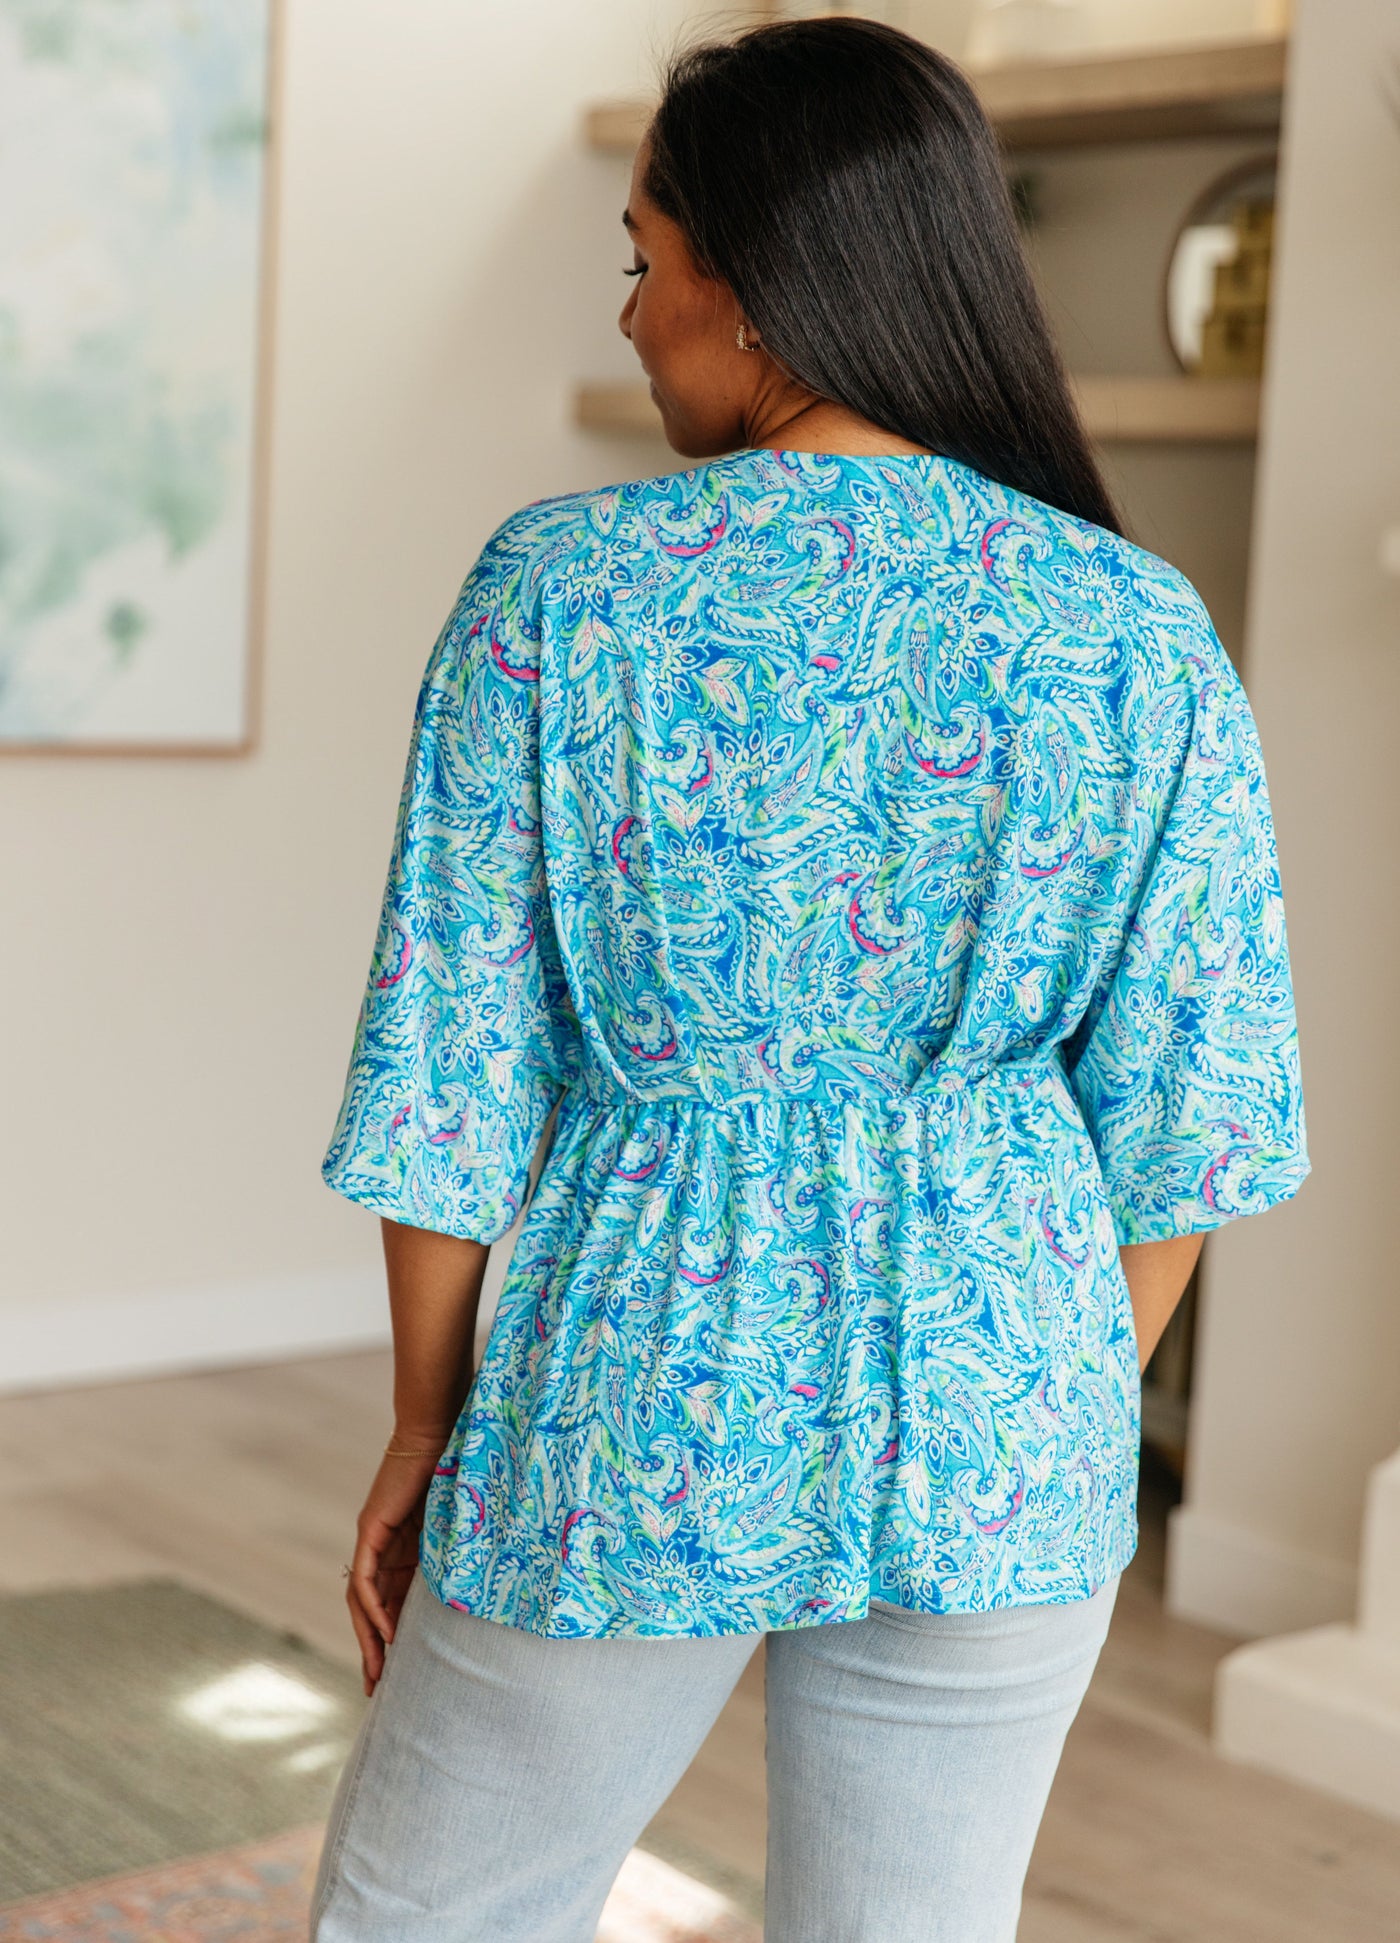 Dreamer Peplum Top in Blue and Teal Paisley-Tops-Ave Shops-Market Street Nest, Fashionable Clothing, Shoes and Home Décor Located in Mabank, TX